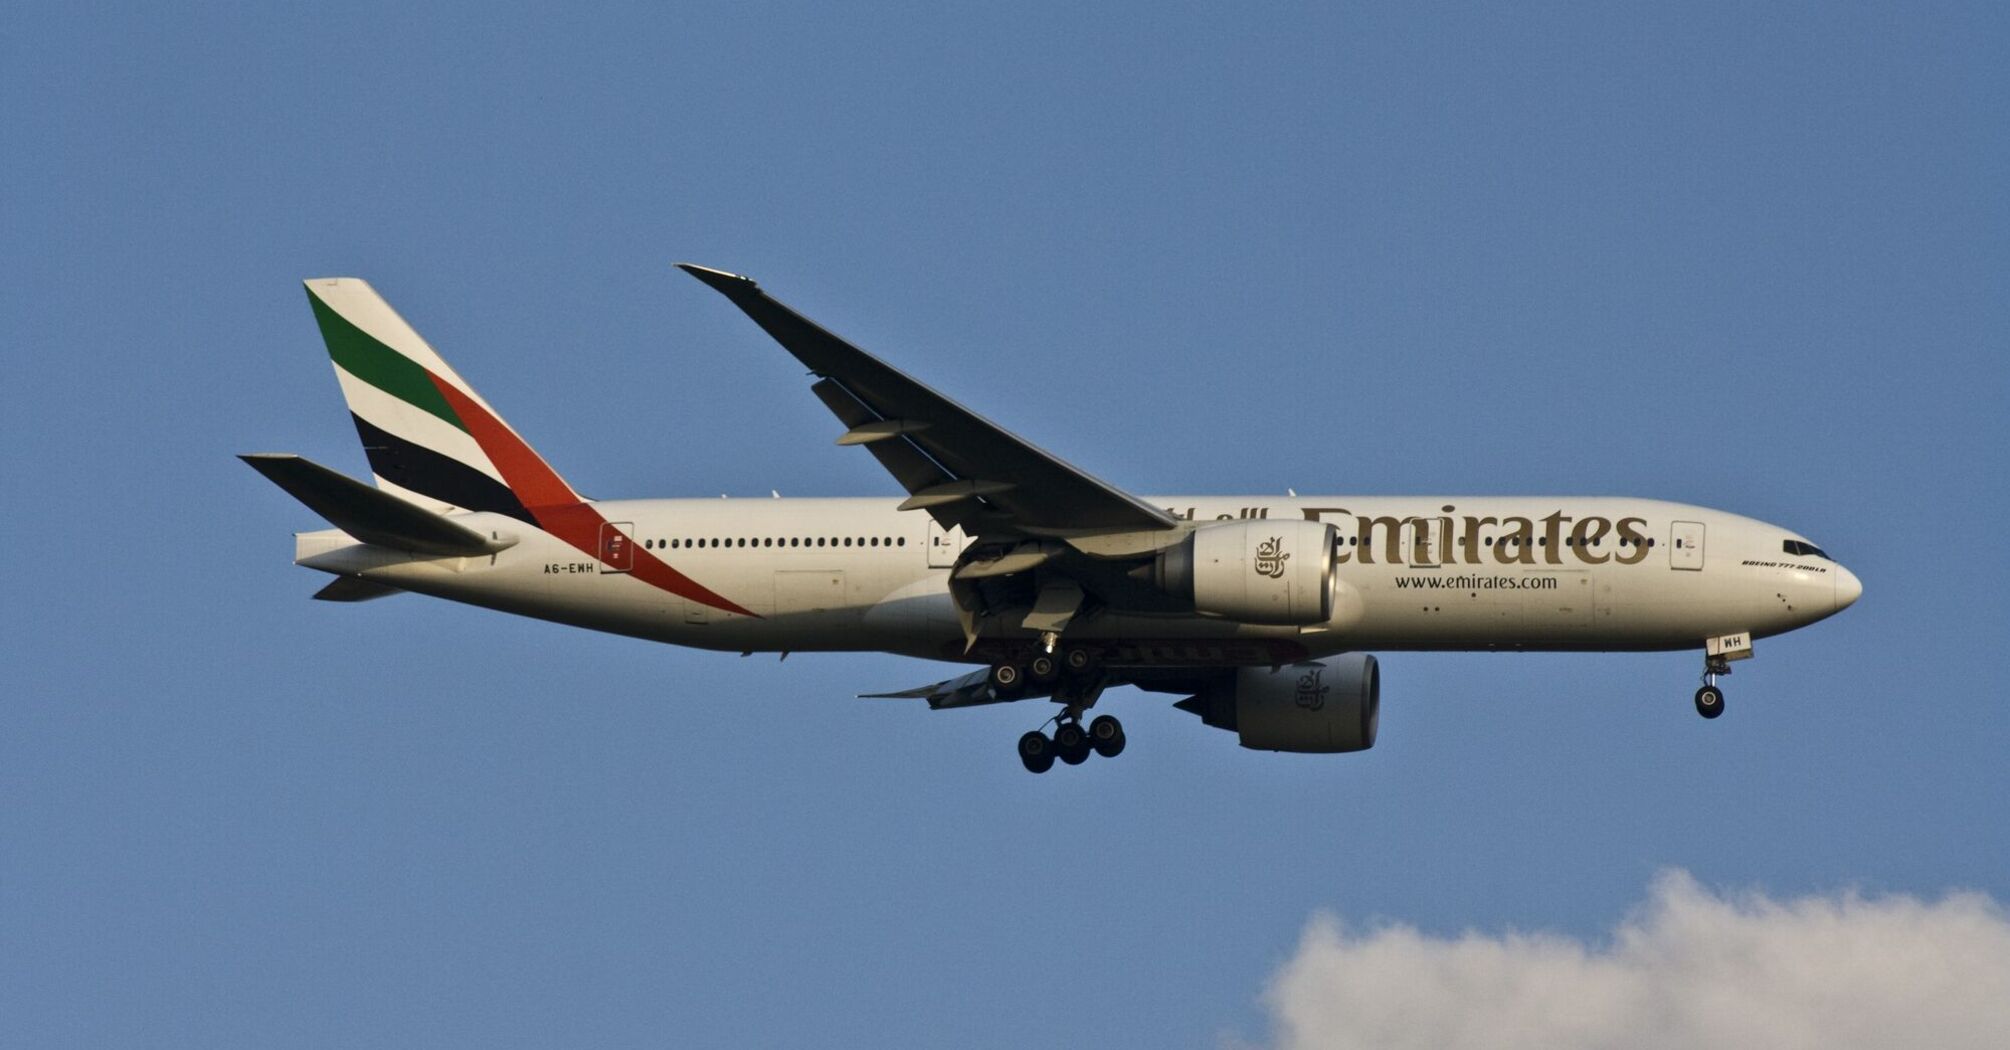 Emirates airline plane flying in the sky